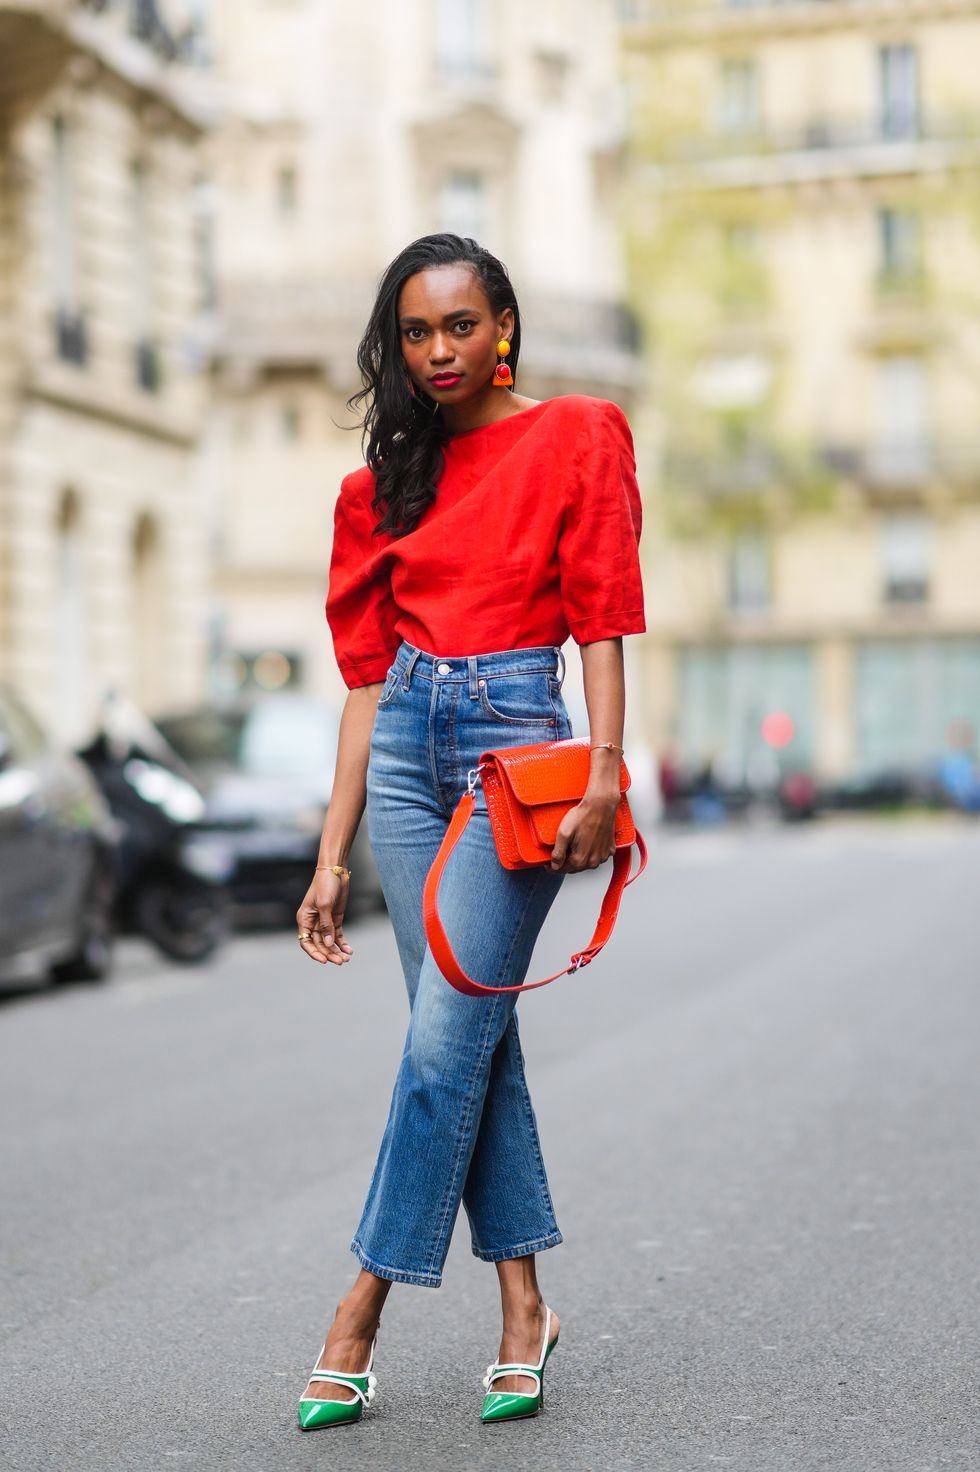 paris, france   april 18 emilie joseph infashionwetrust wears a red vintage linen power shoulder top worn backwards with plunging neckline in the back, blue denim high rise straight ribcage jeans from levis, green two toned patent leather pointy sling back sandals  pumps from miumiu, a red vegan embossed leather bag from hvisk, clip on vintage colorblock ceramic earrings, on april 18, 2021 in paris, france photo by edward berthelotgetty images